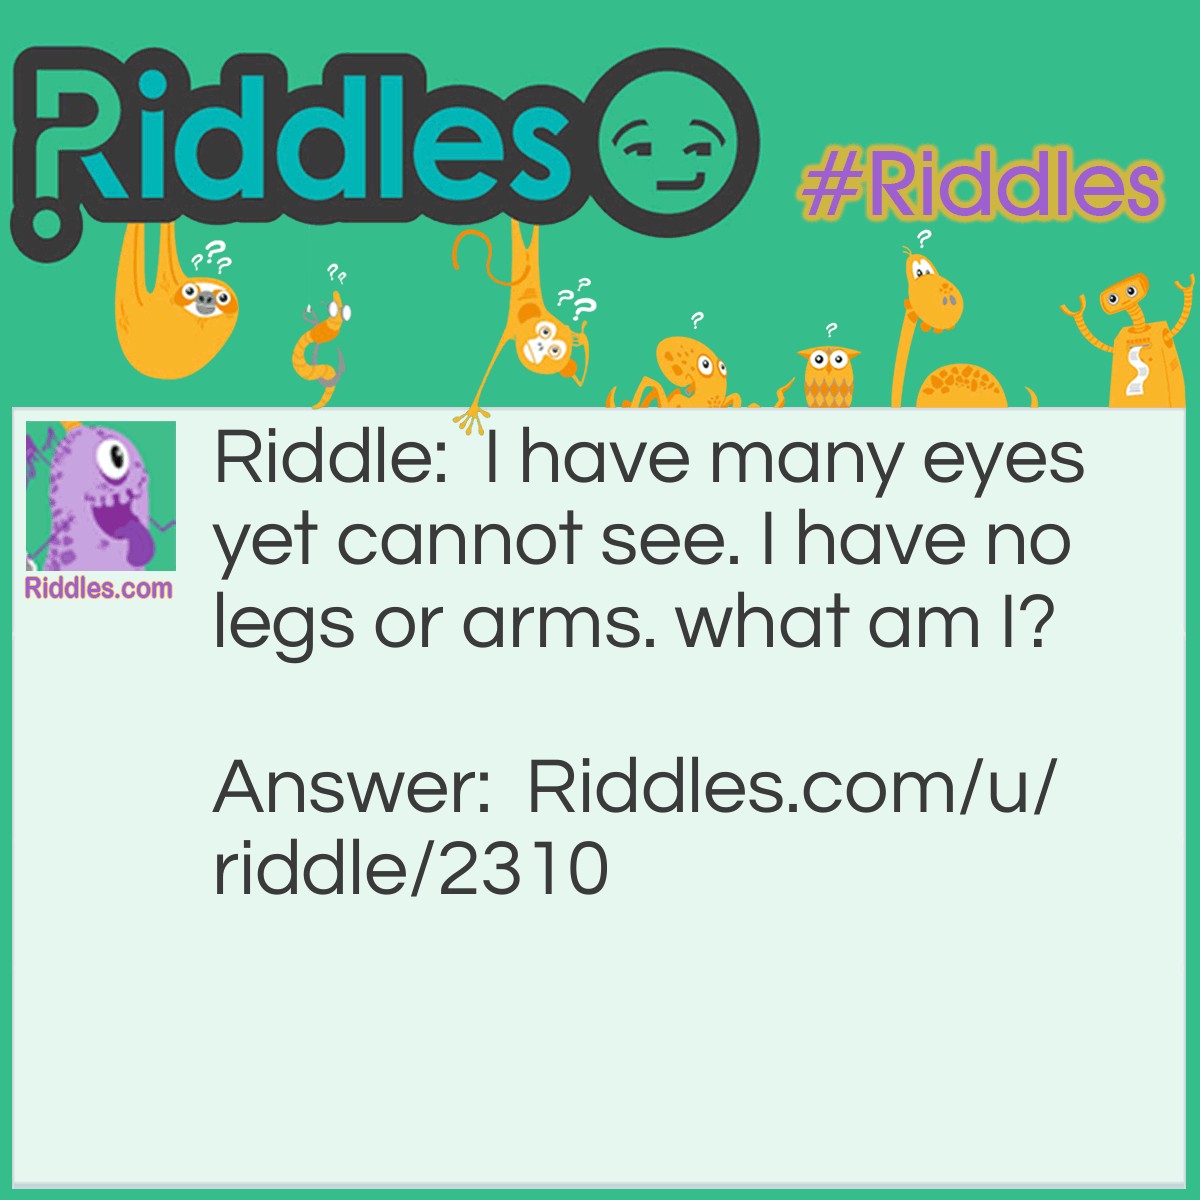 Riddle: I have many eyes yet cannot see. I have no legs or arms. what am I? Answer: A Potato.